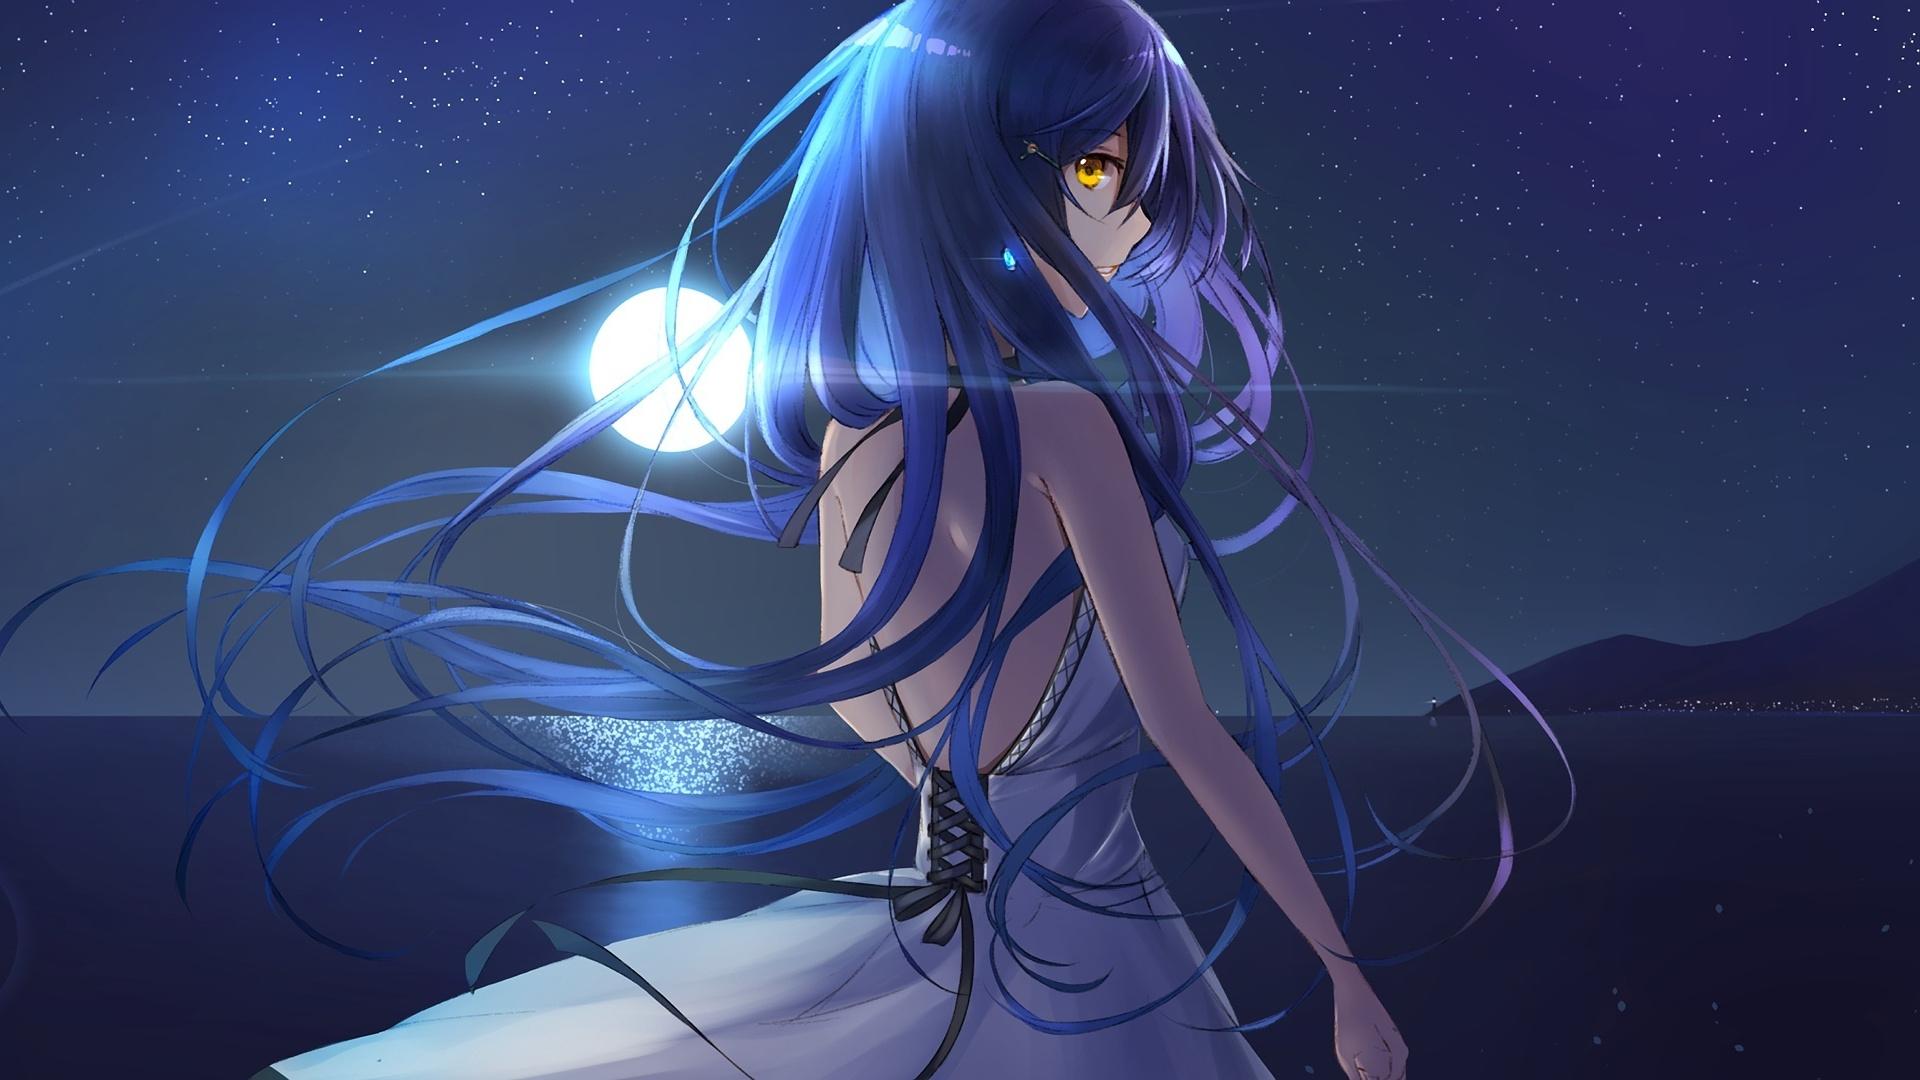 Download 1920x1080 wallpaper night out, anime girl, blue long hair